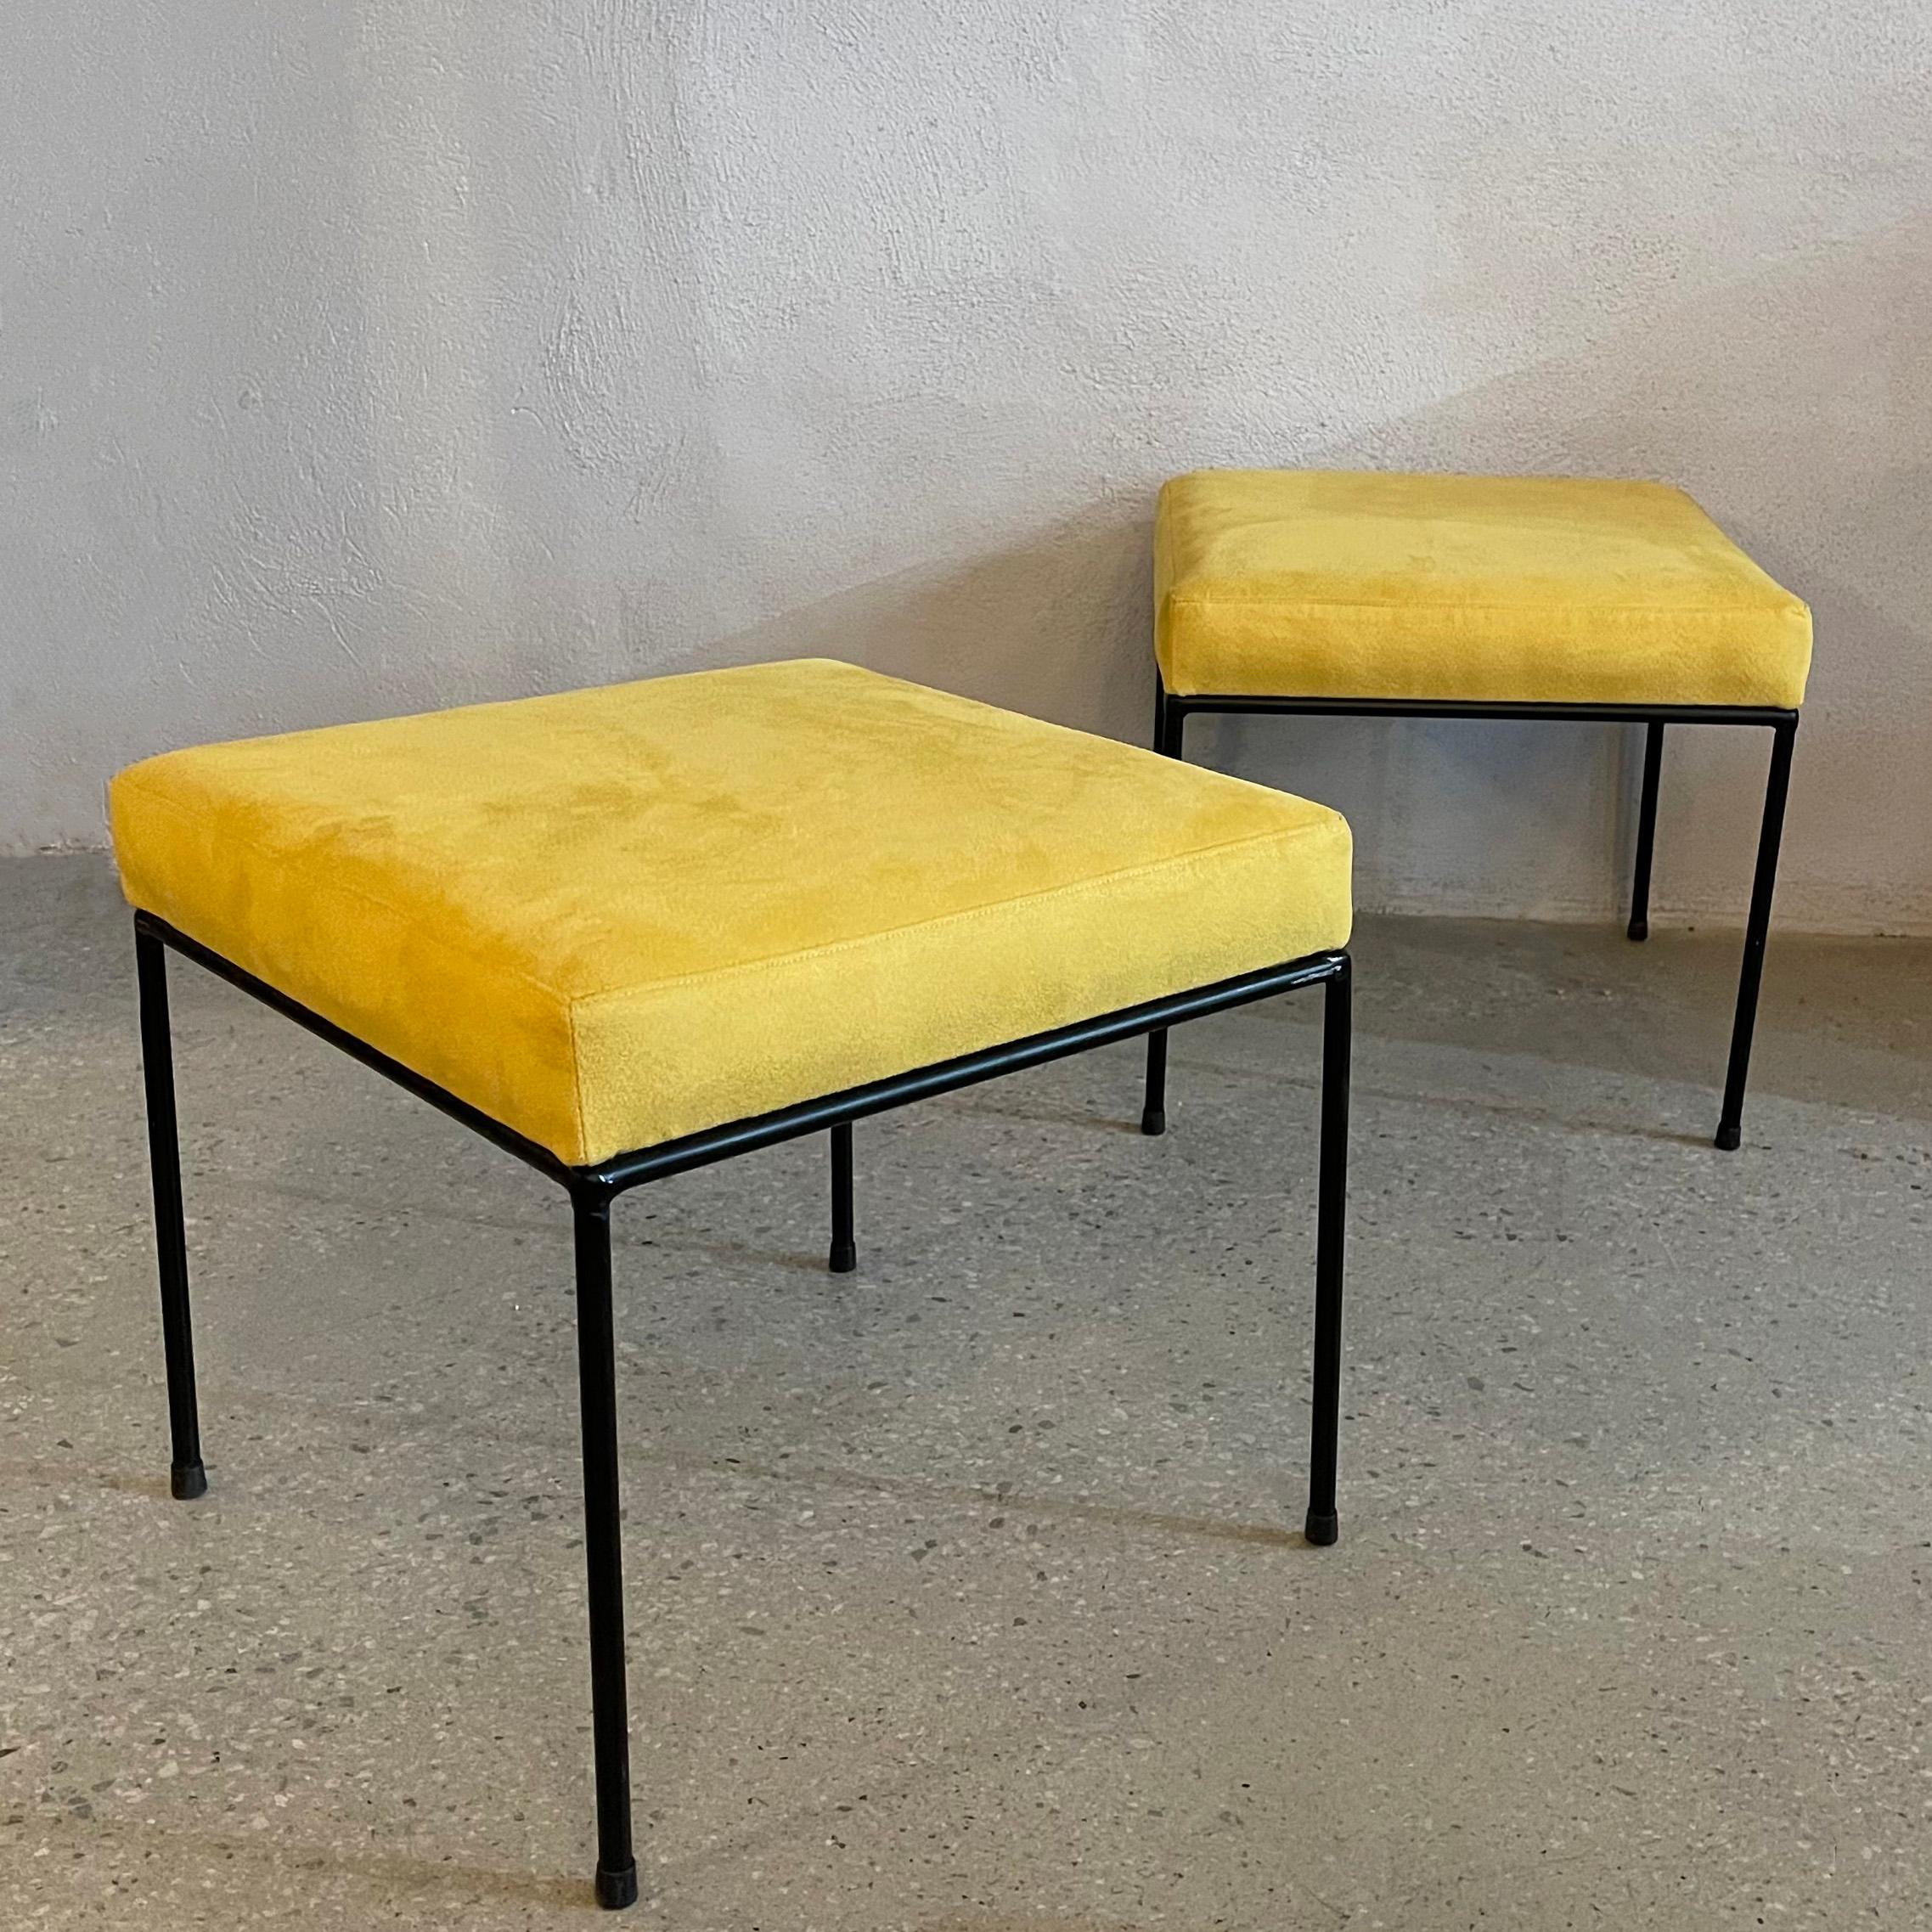 20th Century Minimal Mid-Century Modern Wrought Iron And Ultrasuede Ottomans